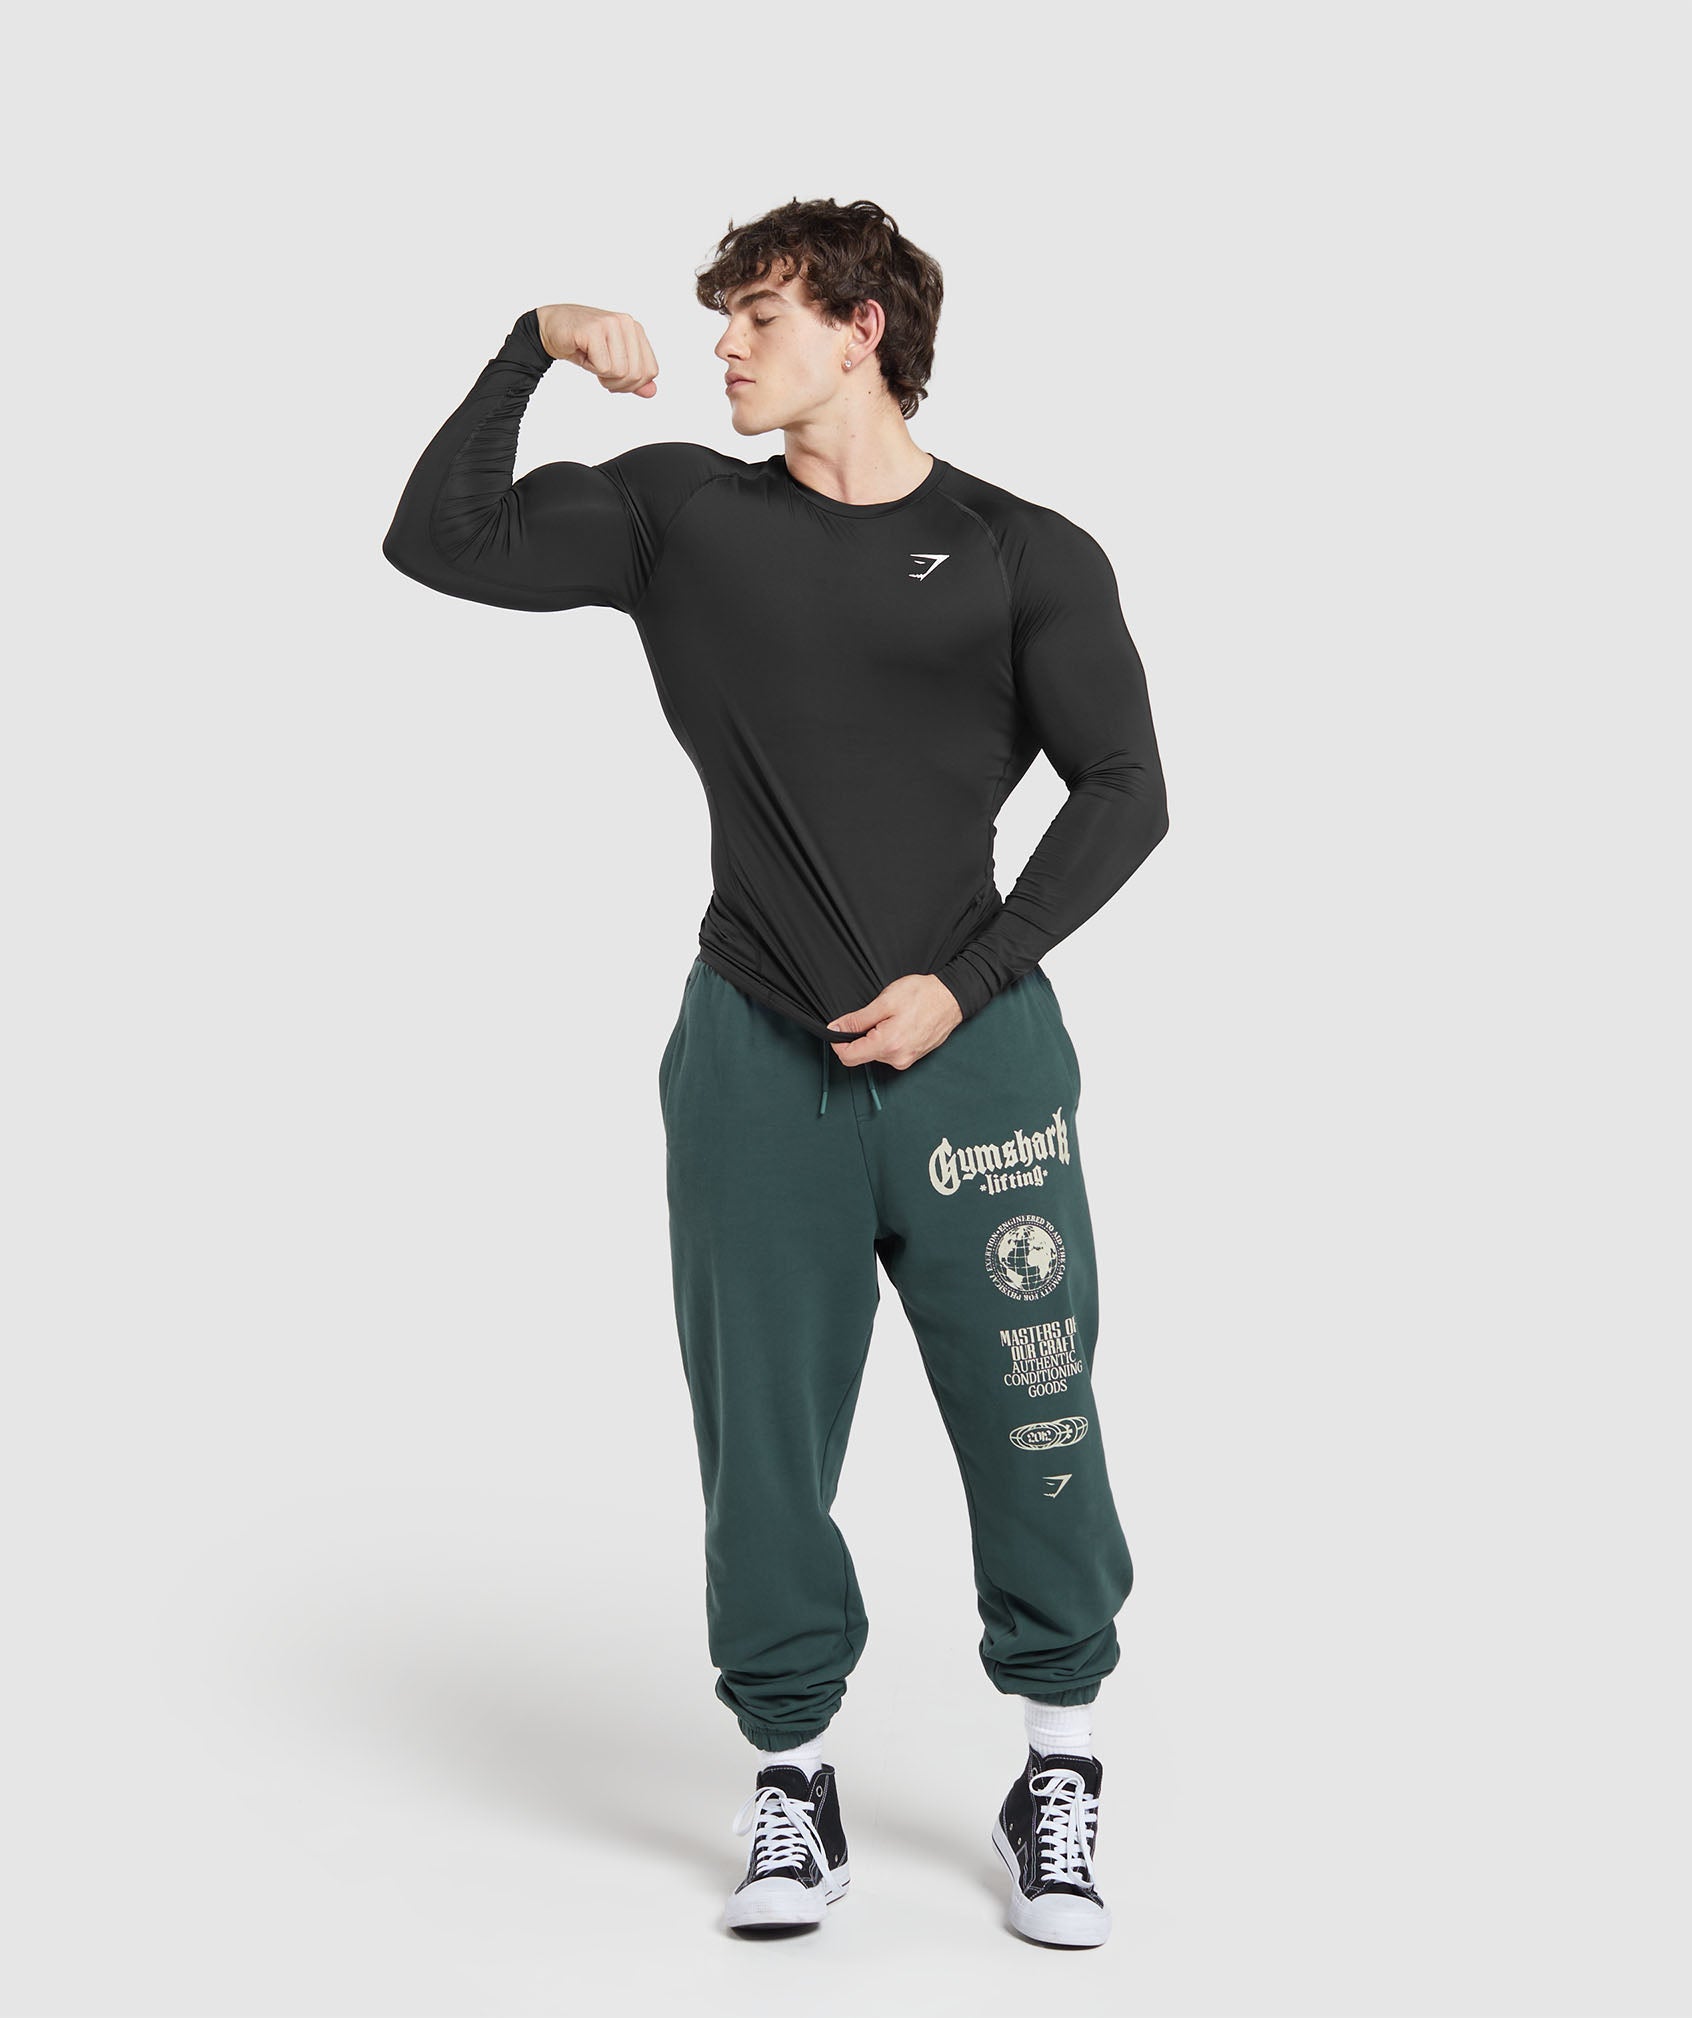 Global Lifting Oversized Pants in Green - view 4